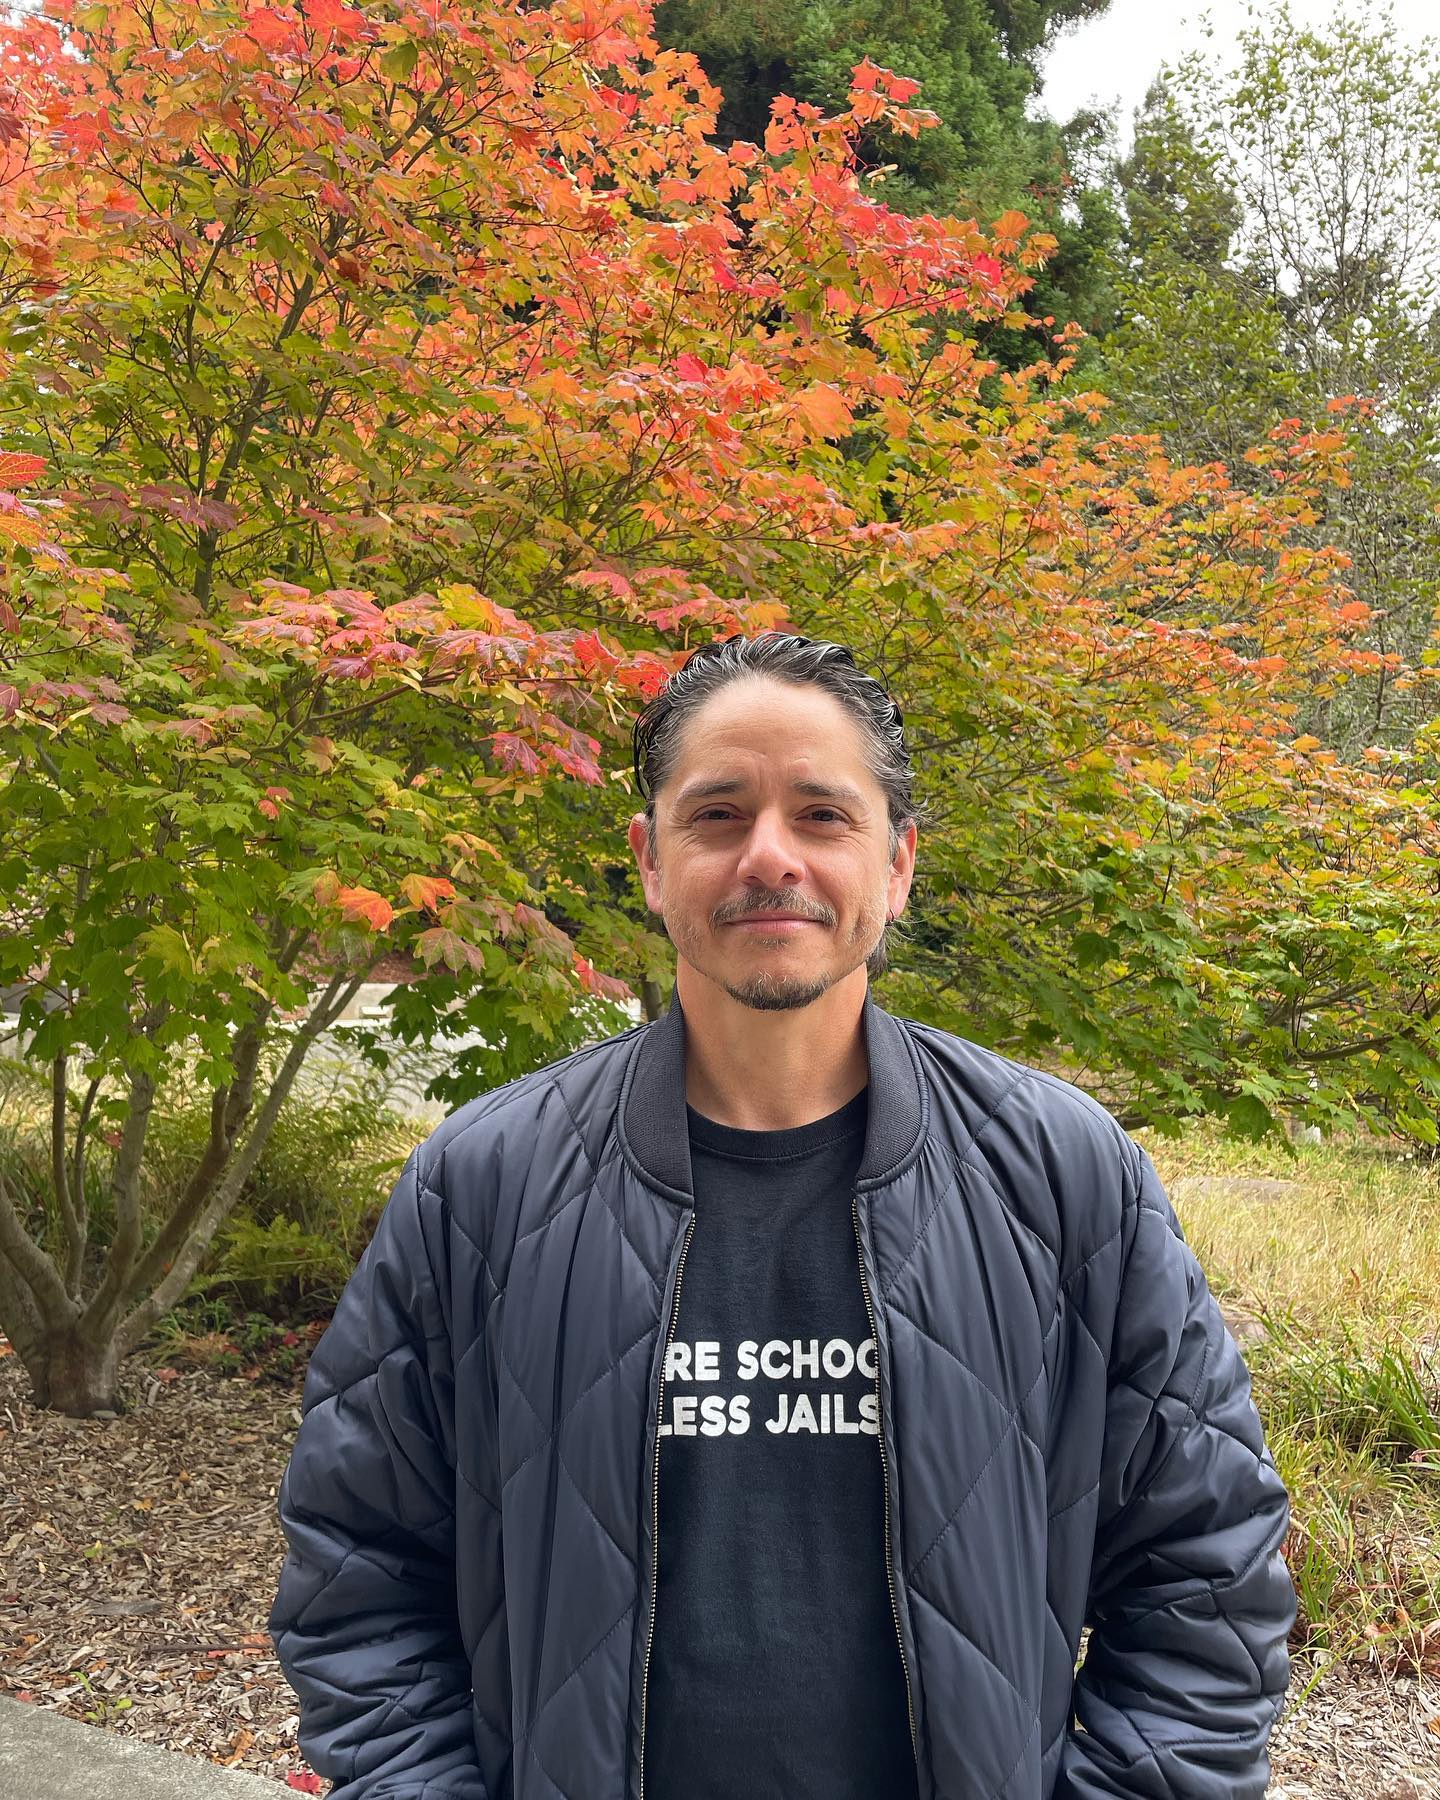 Roberto Mónico is a new assistant professor this fall in the Department of Critical, Race, Gender and Sexuality Studies. Mónico is dedicated to supporting people who have endured hyper policing and the prison industrial complex. Link is in the bio. 

Story by: Celeste Sadler 
Photo by: Celeste Sadler 

#ellenadornews #CRGS #Arcata #Humboldt #CalPolyHumboldt